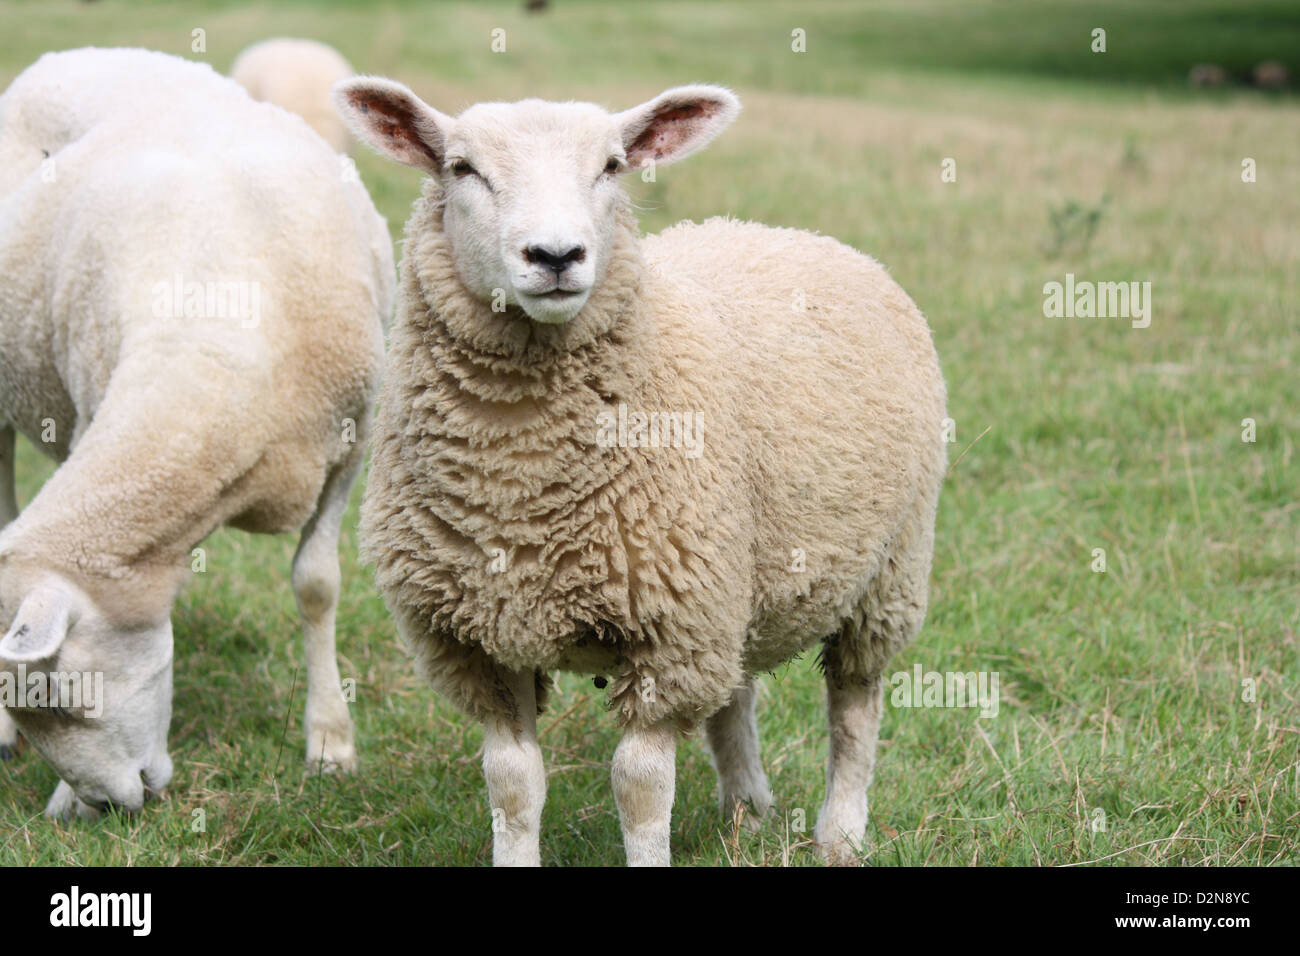 Two sheep in a grass field. Stock Photo